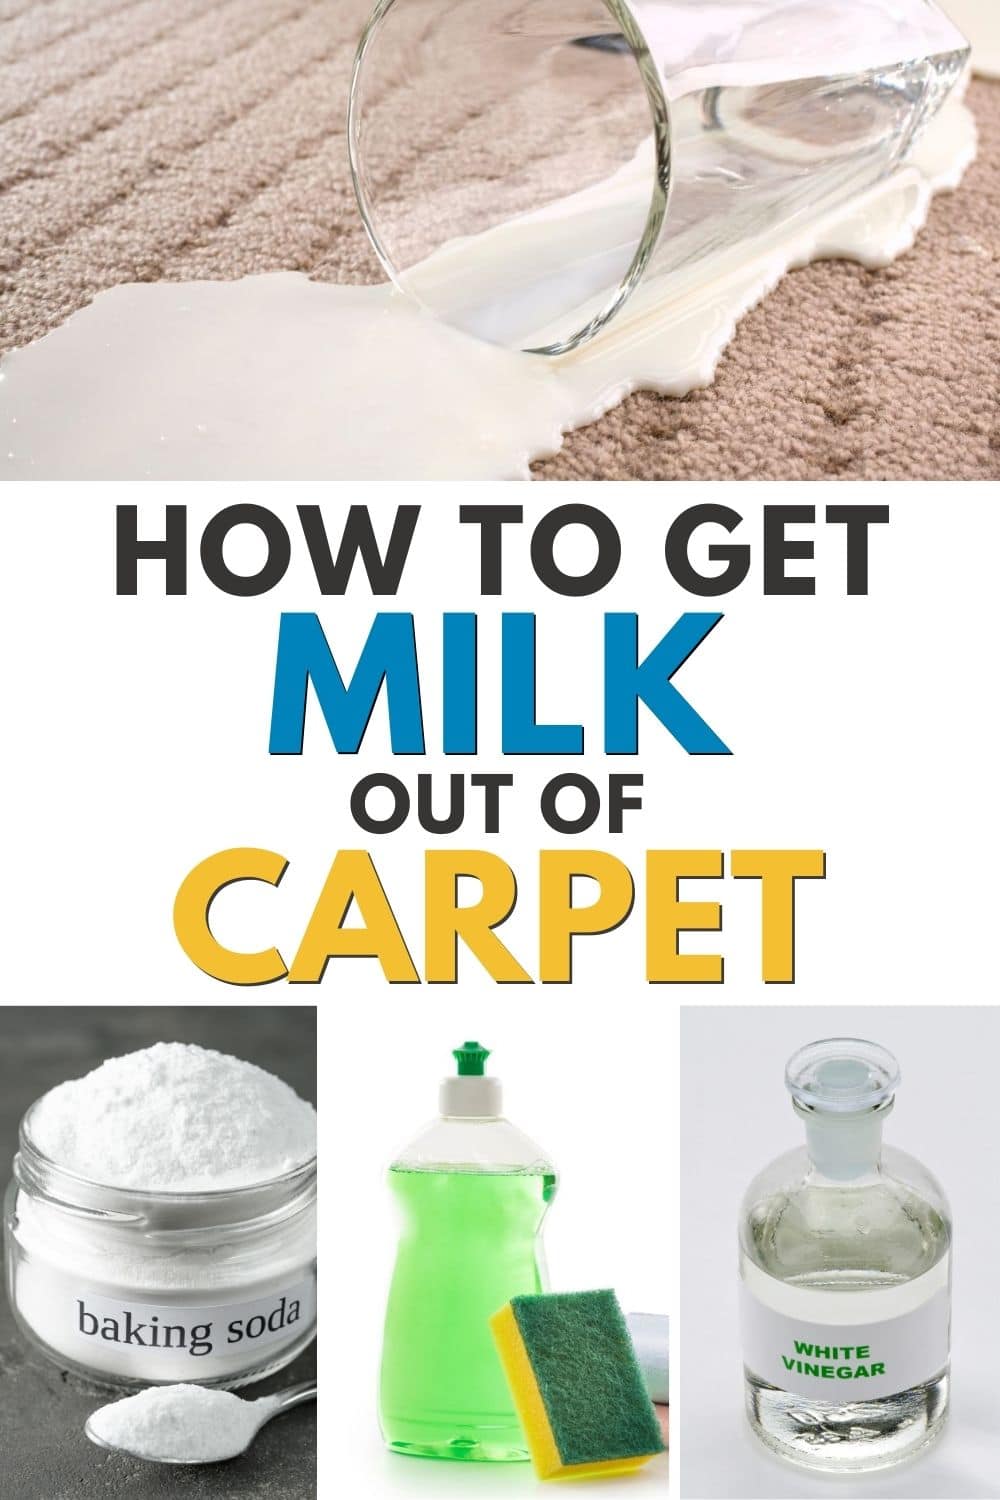 Need to know how to get milk out of carpet? This step-by-step guide will show you the easiest and most effective methods for removing milk stains from your carpet.